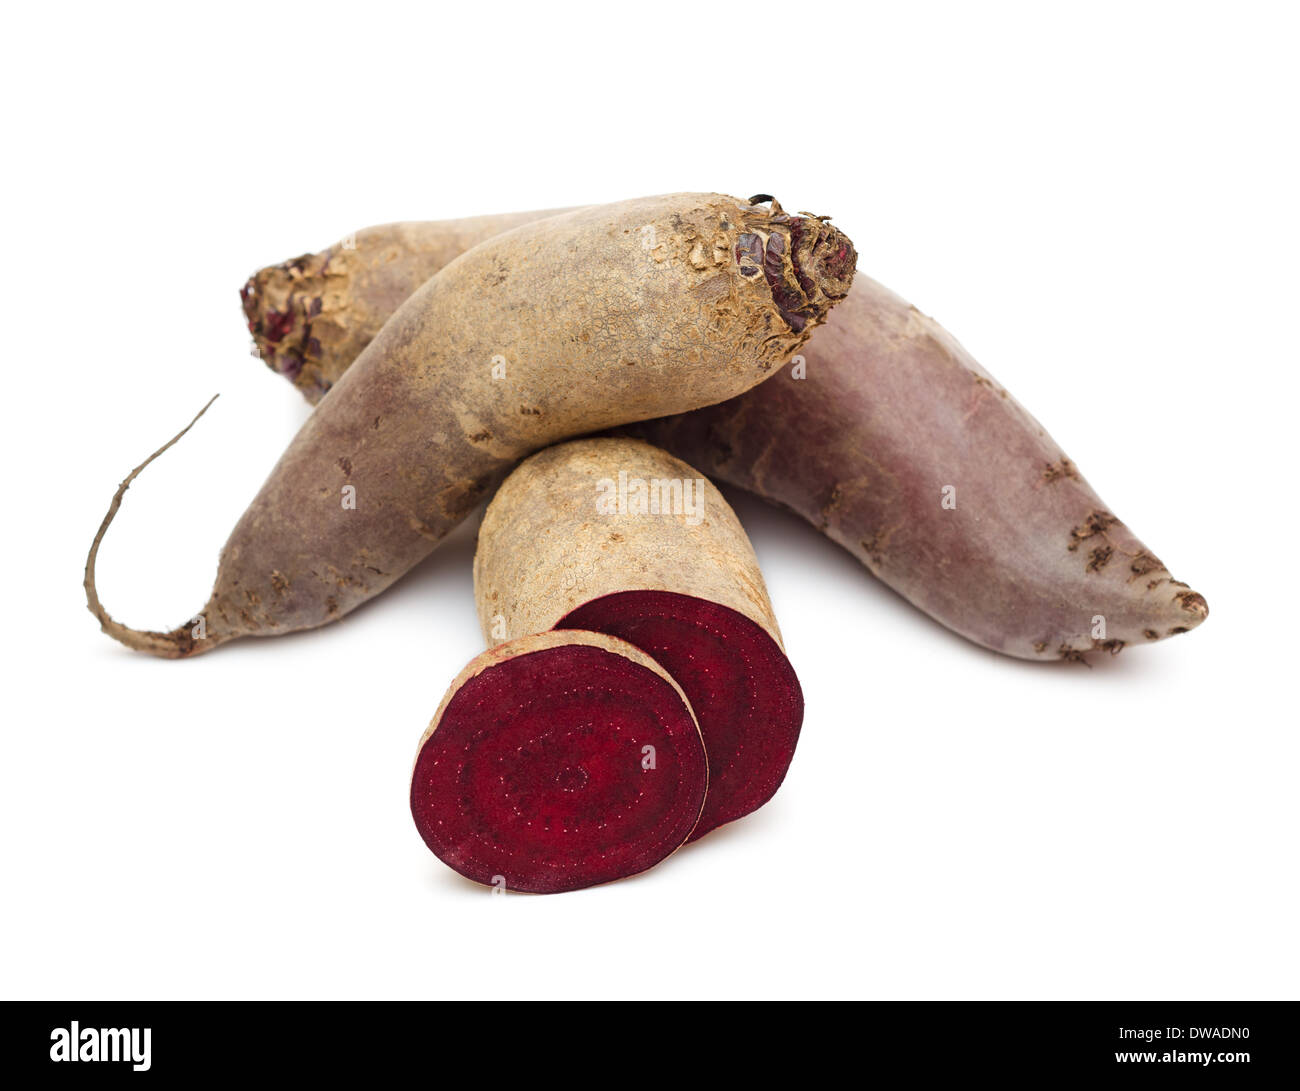 Red beetroots and slice isolated on white background close-up. Stock Photo